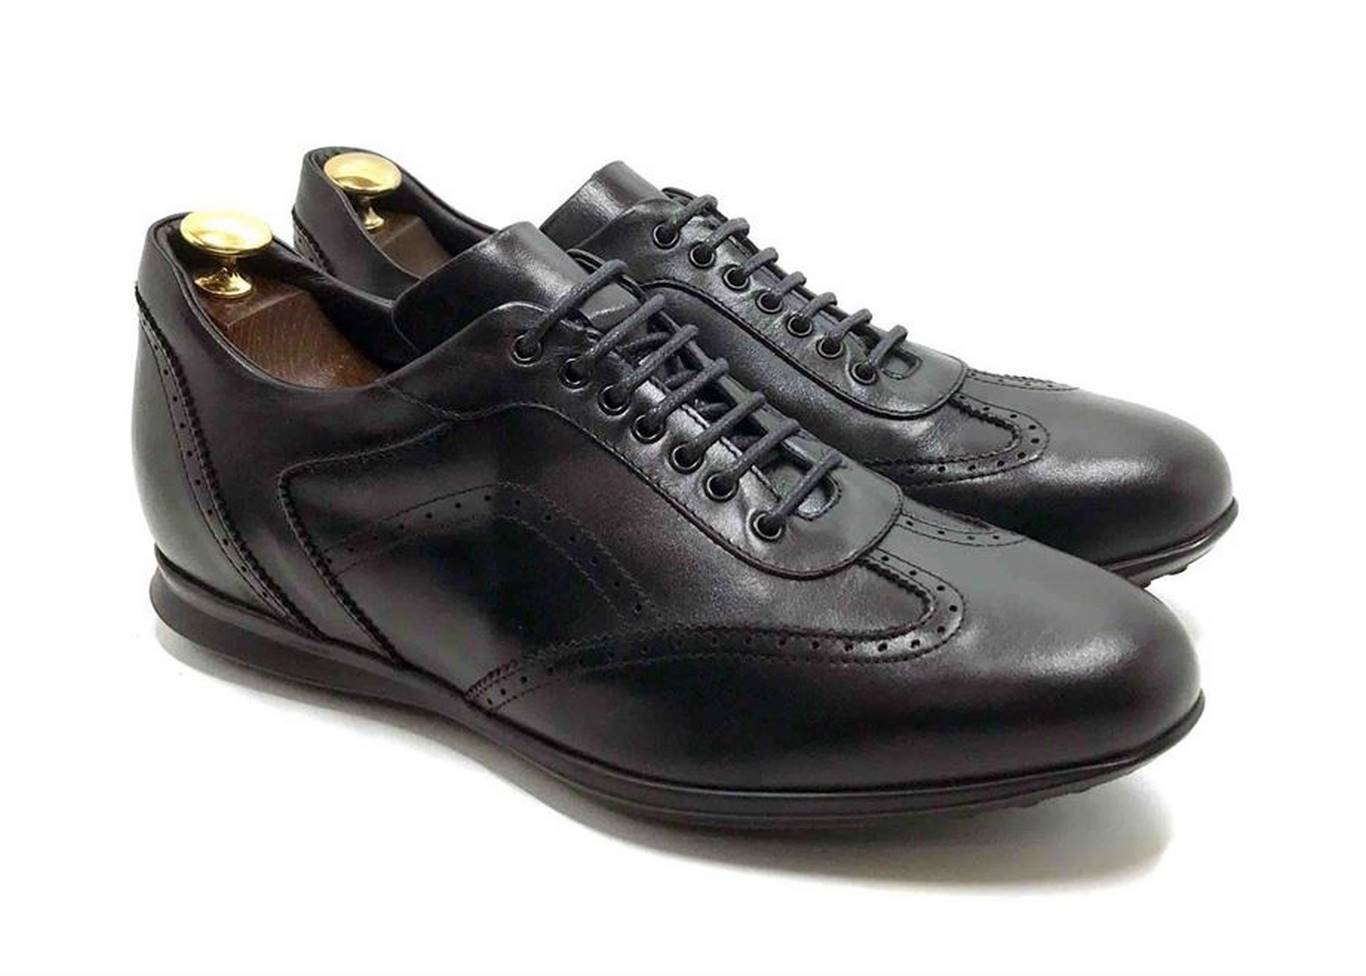 Smart Sneaker in Black calfskin with extractable innersole